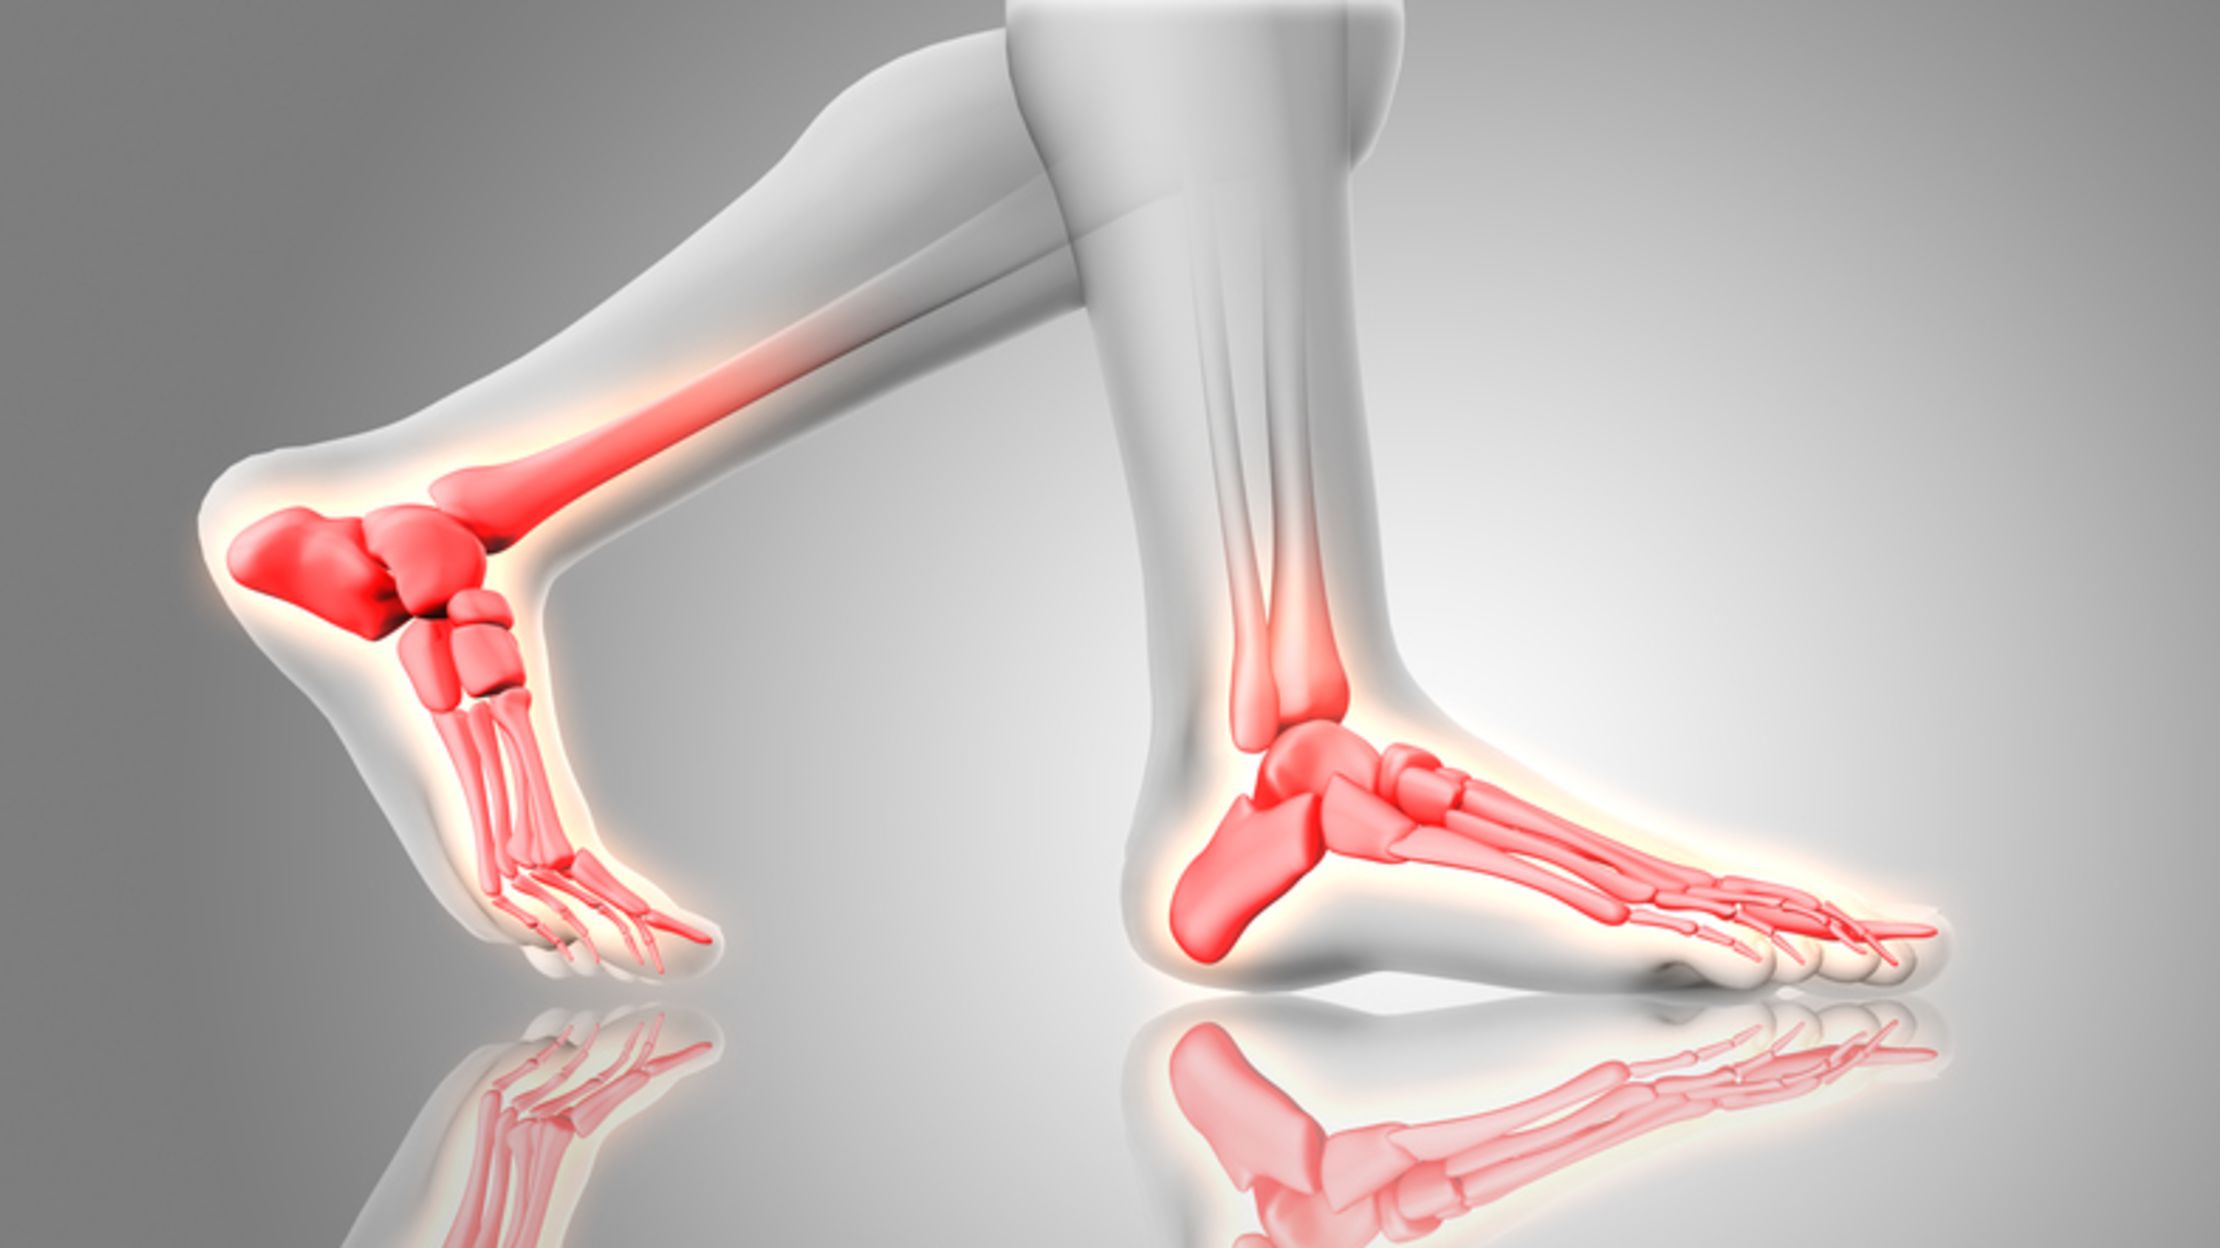 8 Facts About the Ankle | Mental Floss